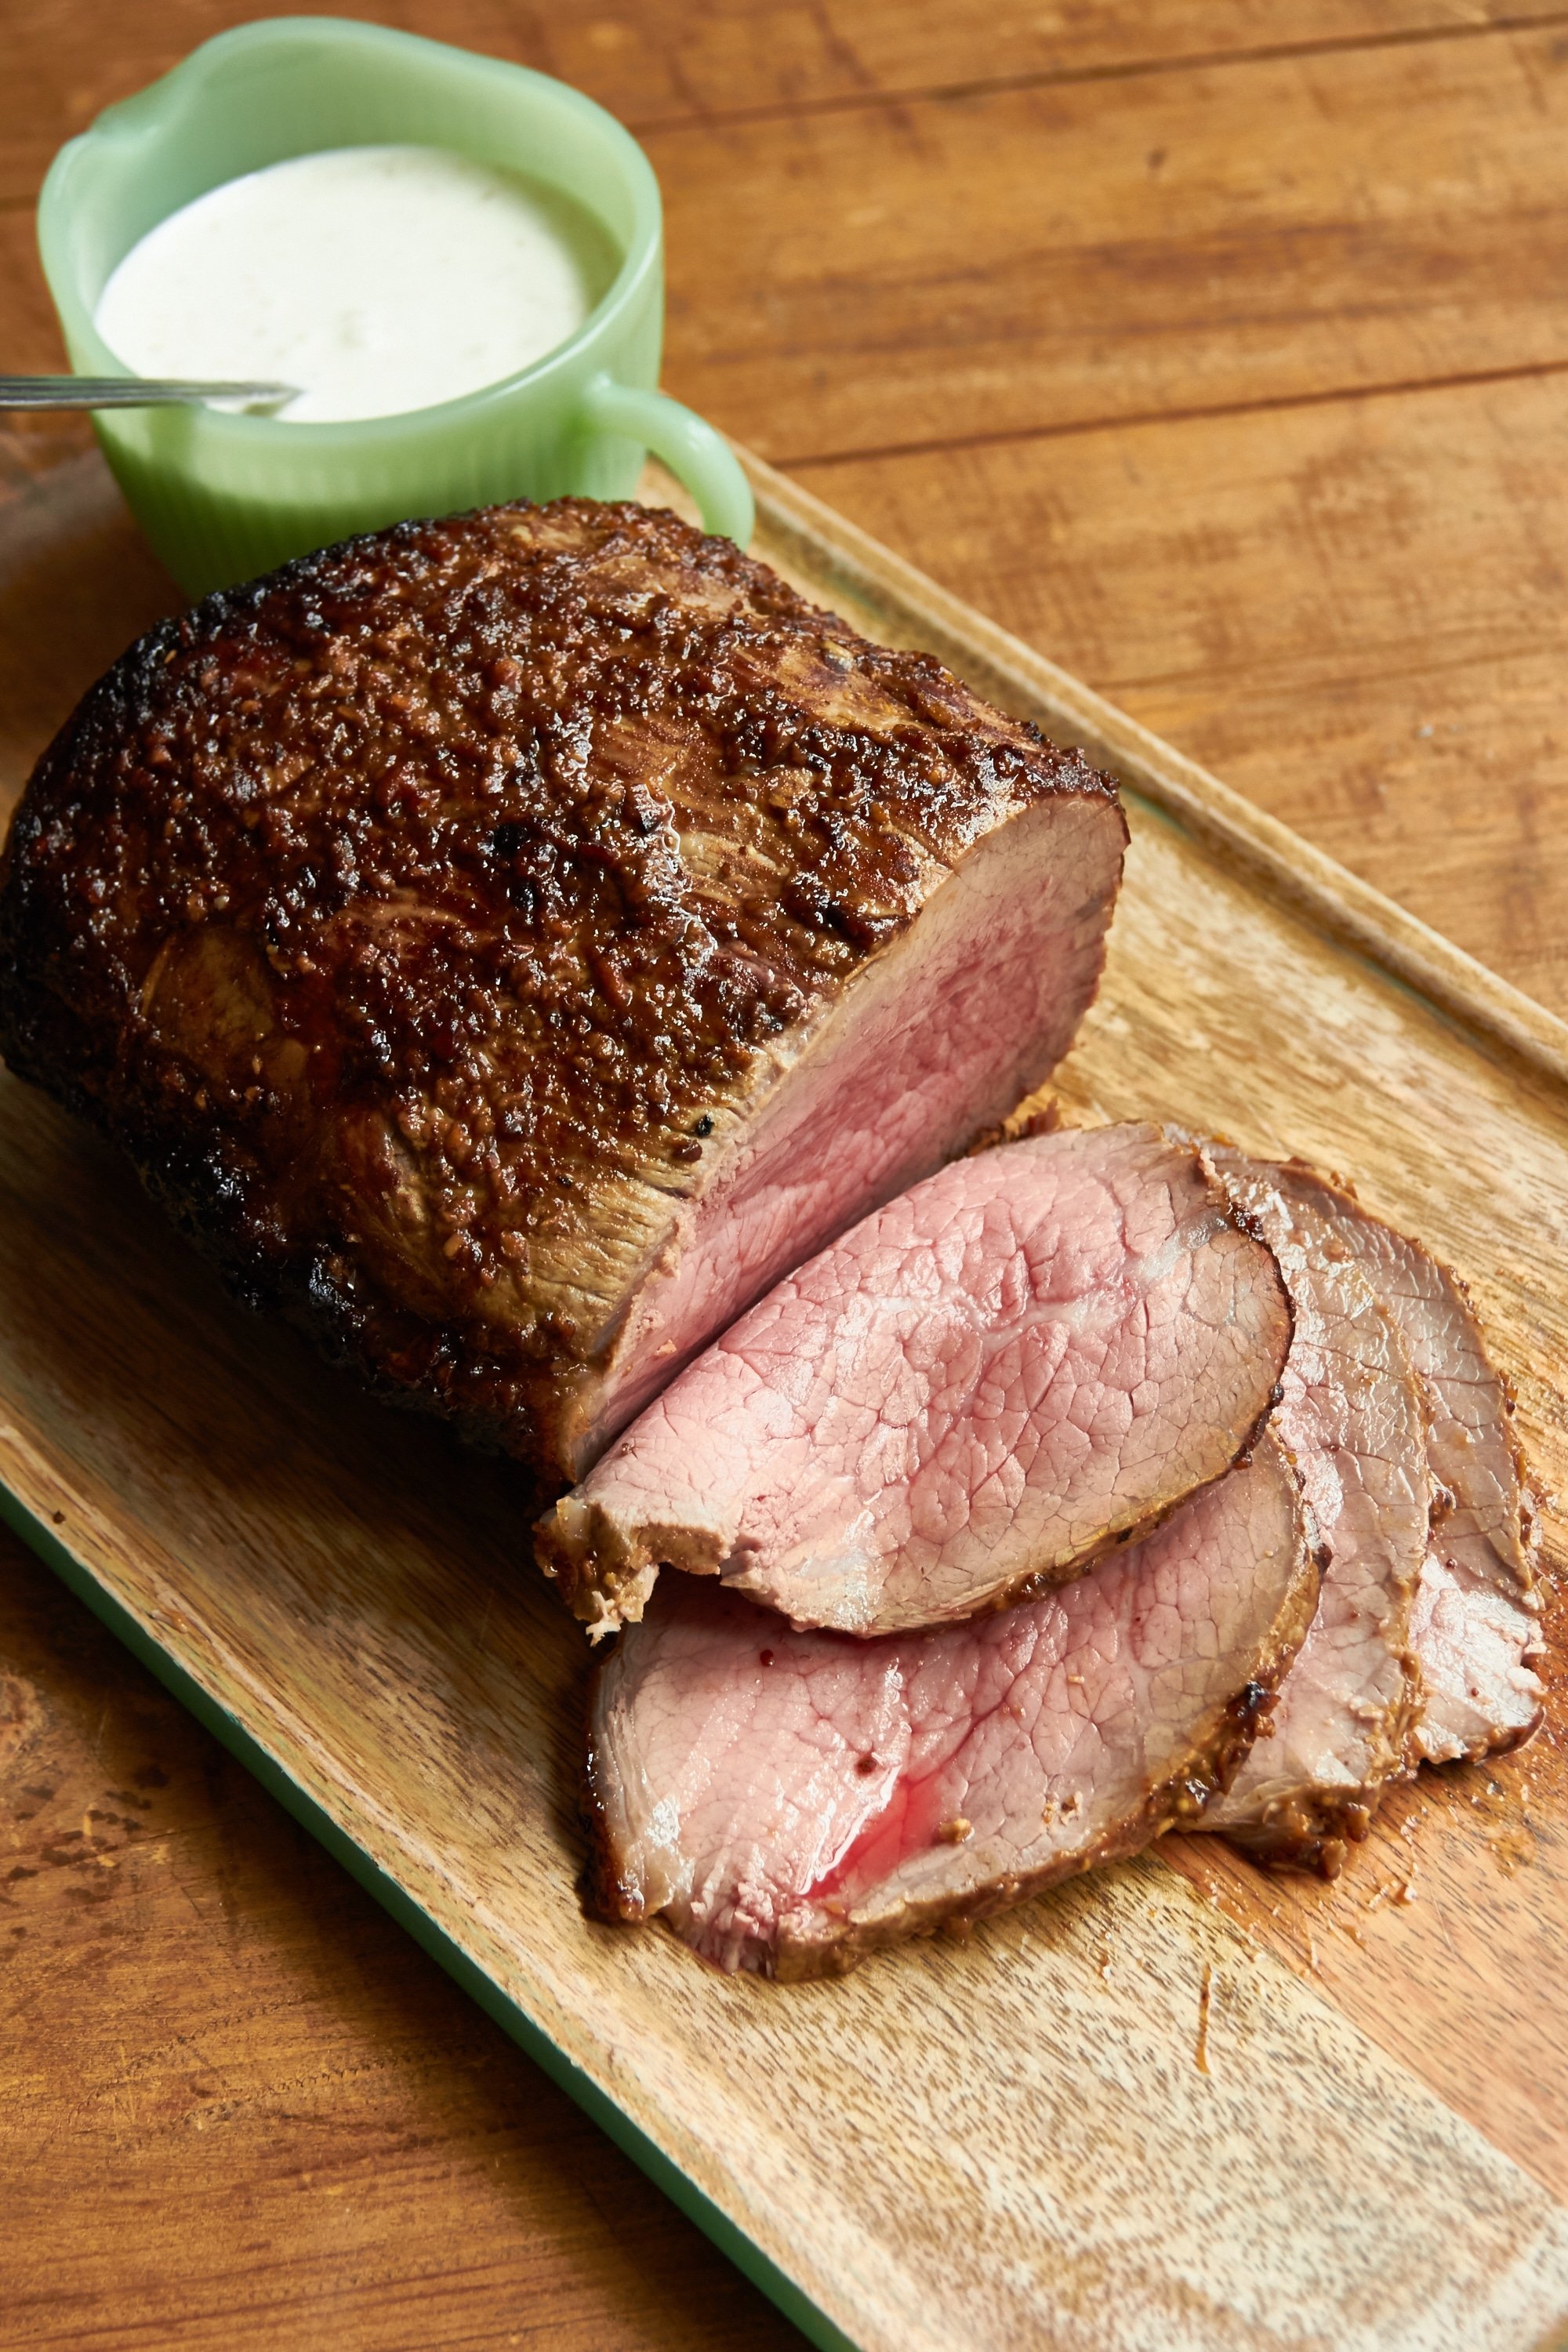 Partially-sliced Roast Beef with Mustard Garlic Crust on a wooden surface.